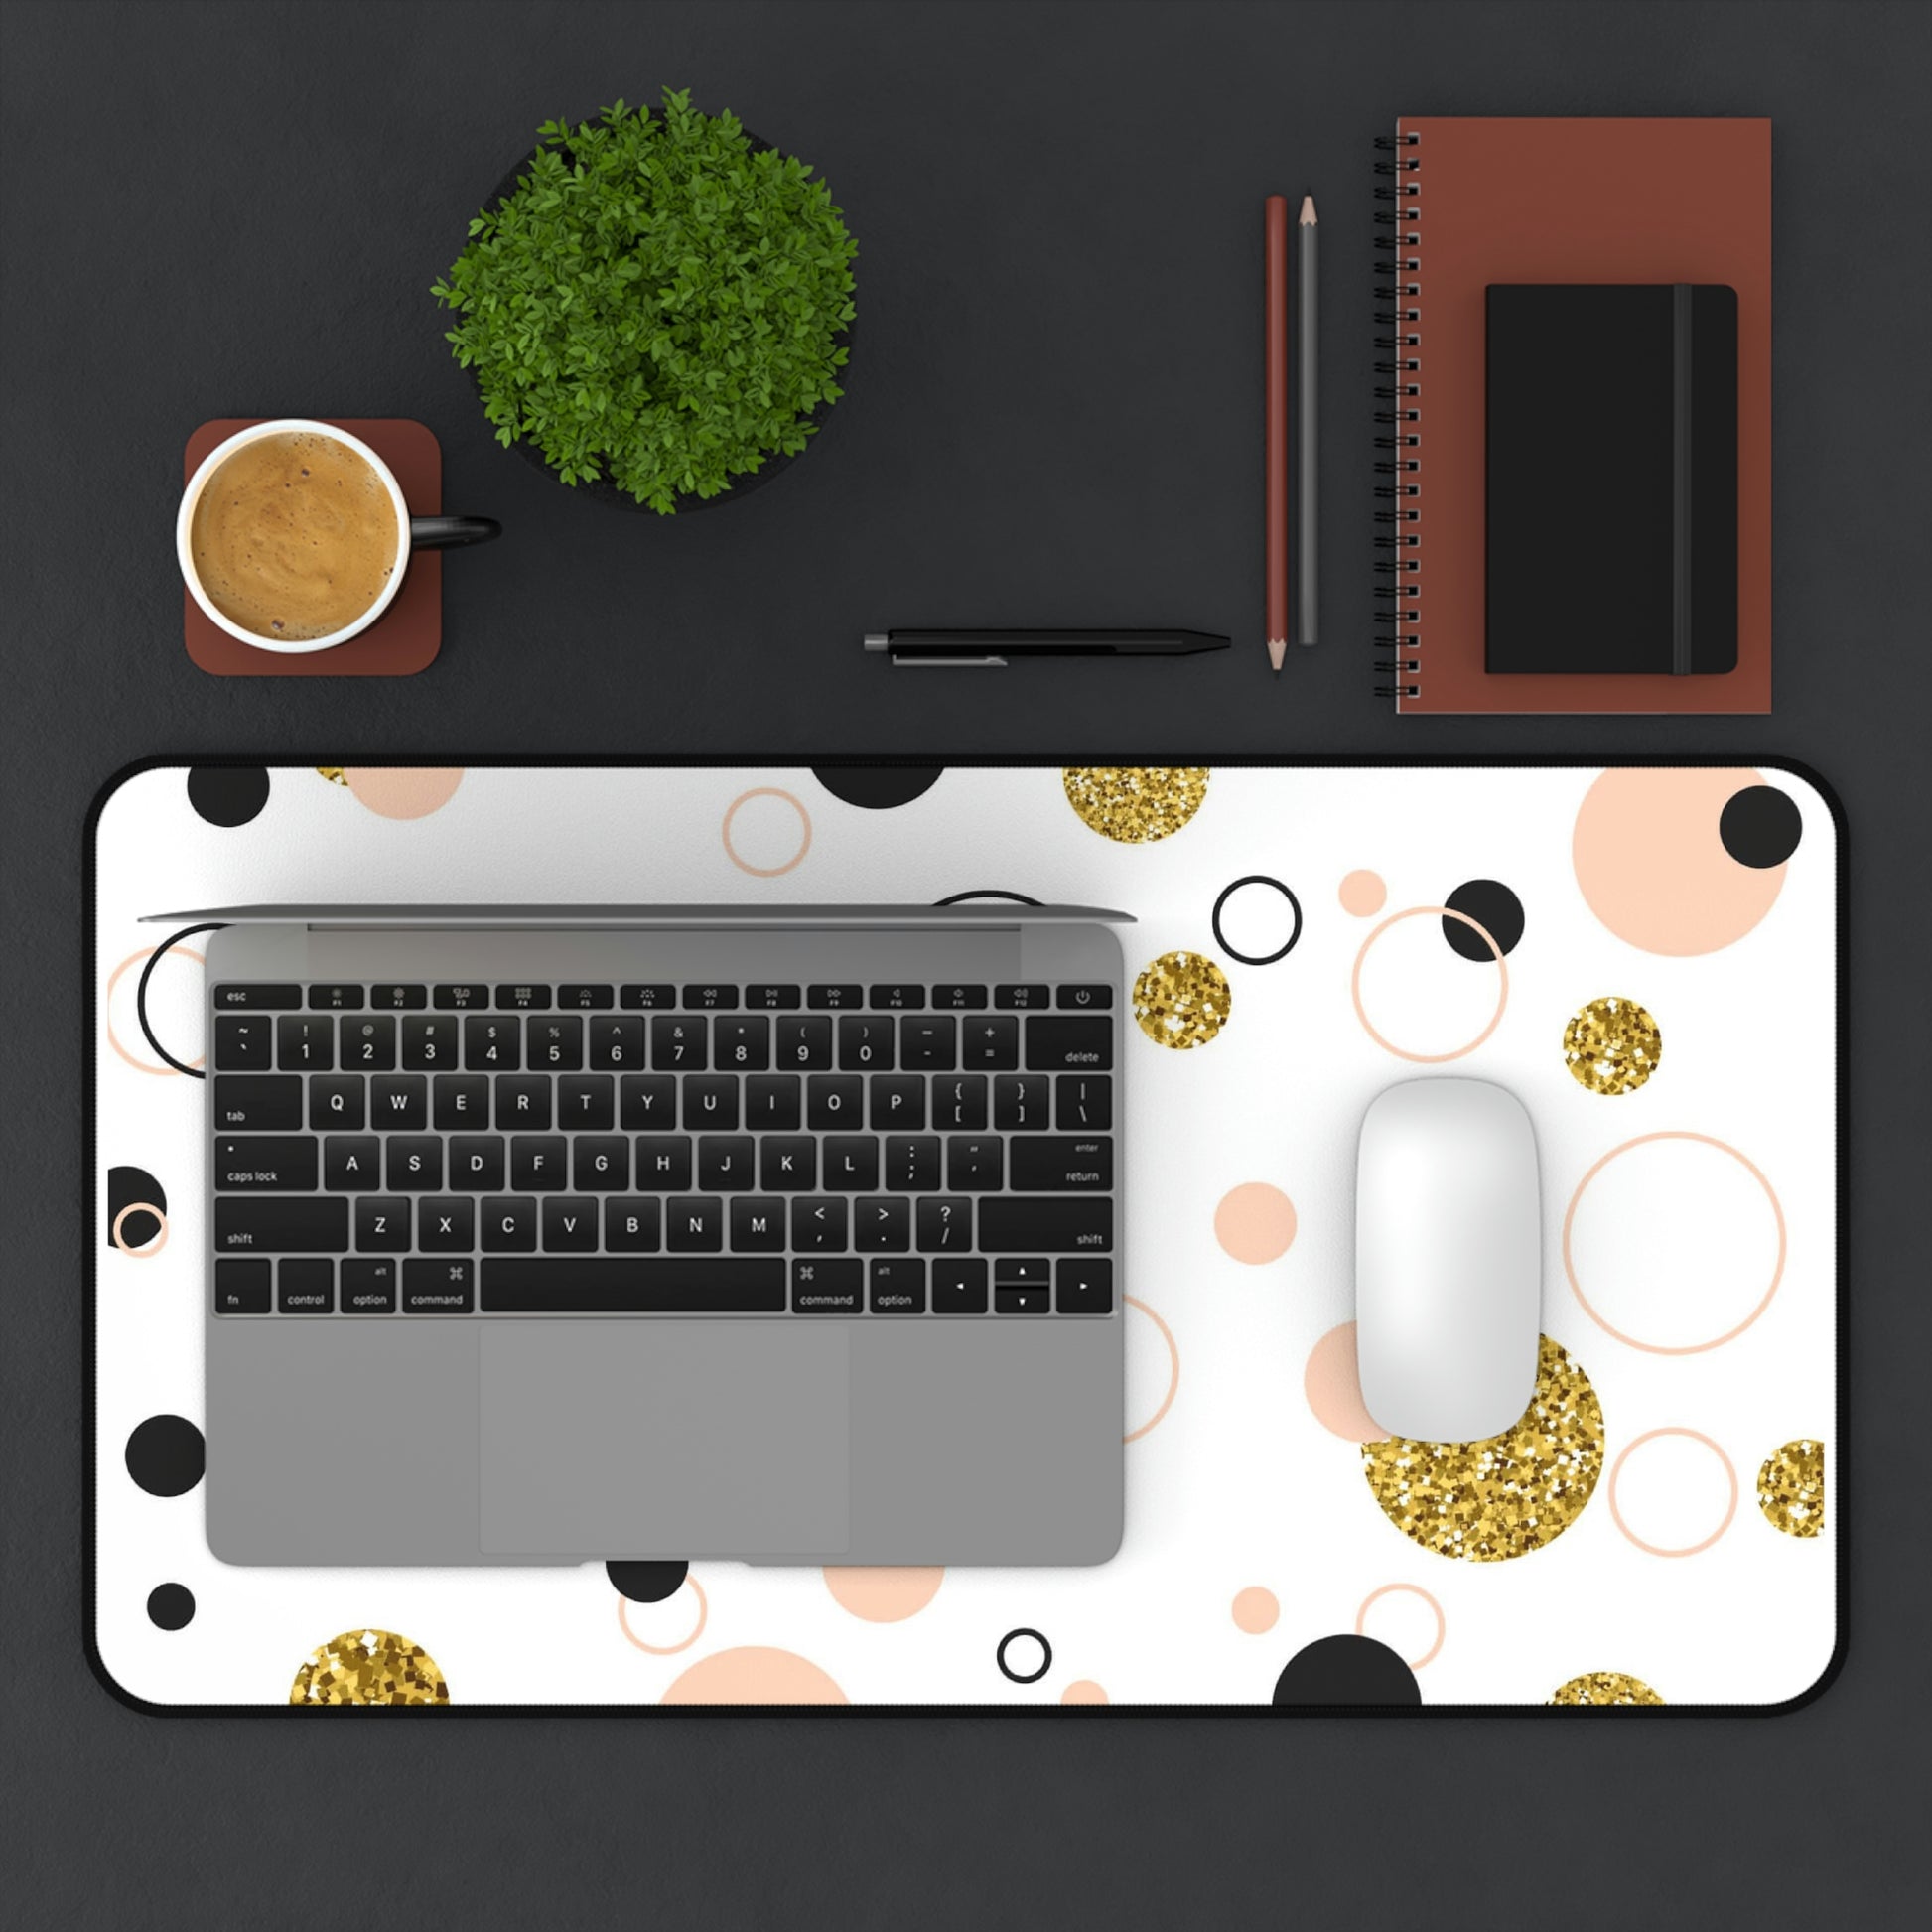 Mock up of 12" x 22" desk mat with laptop and mouse